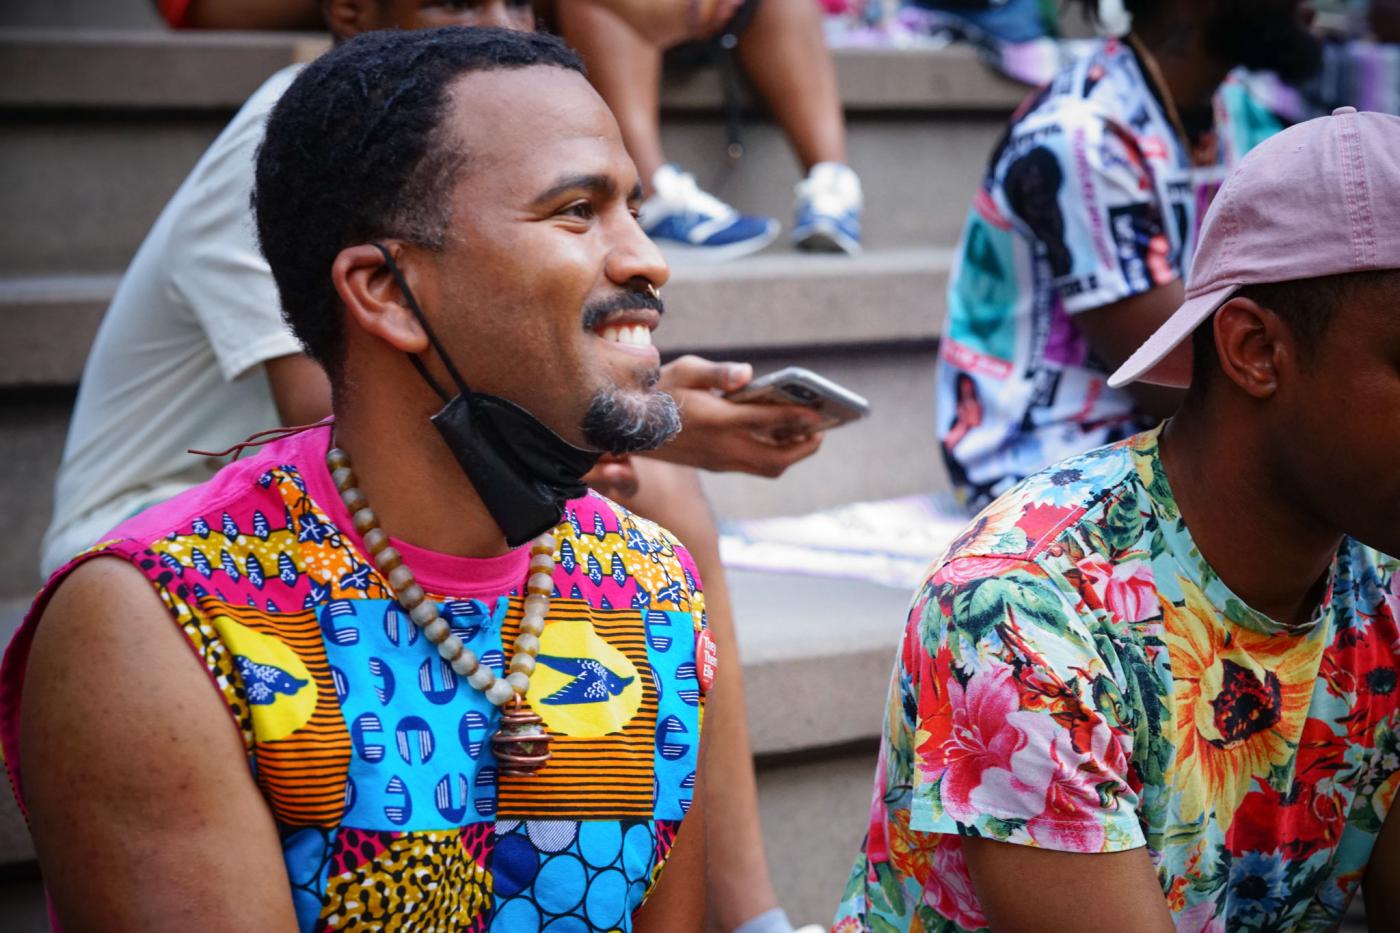 A Black man smiles, has a facemask around his chin, and wears a tank top with a brightly colored print of birds and circles.